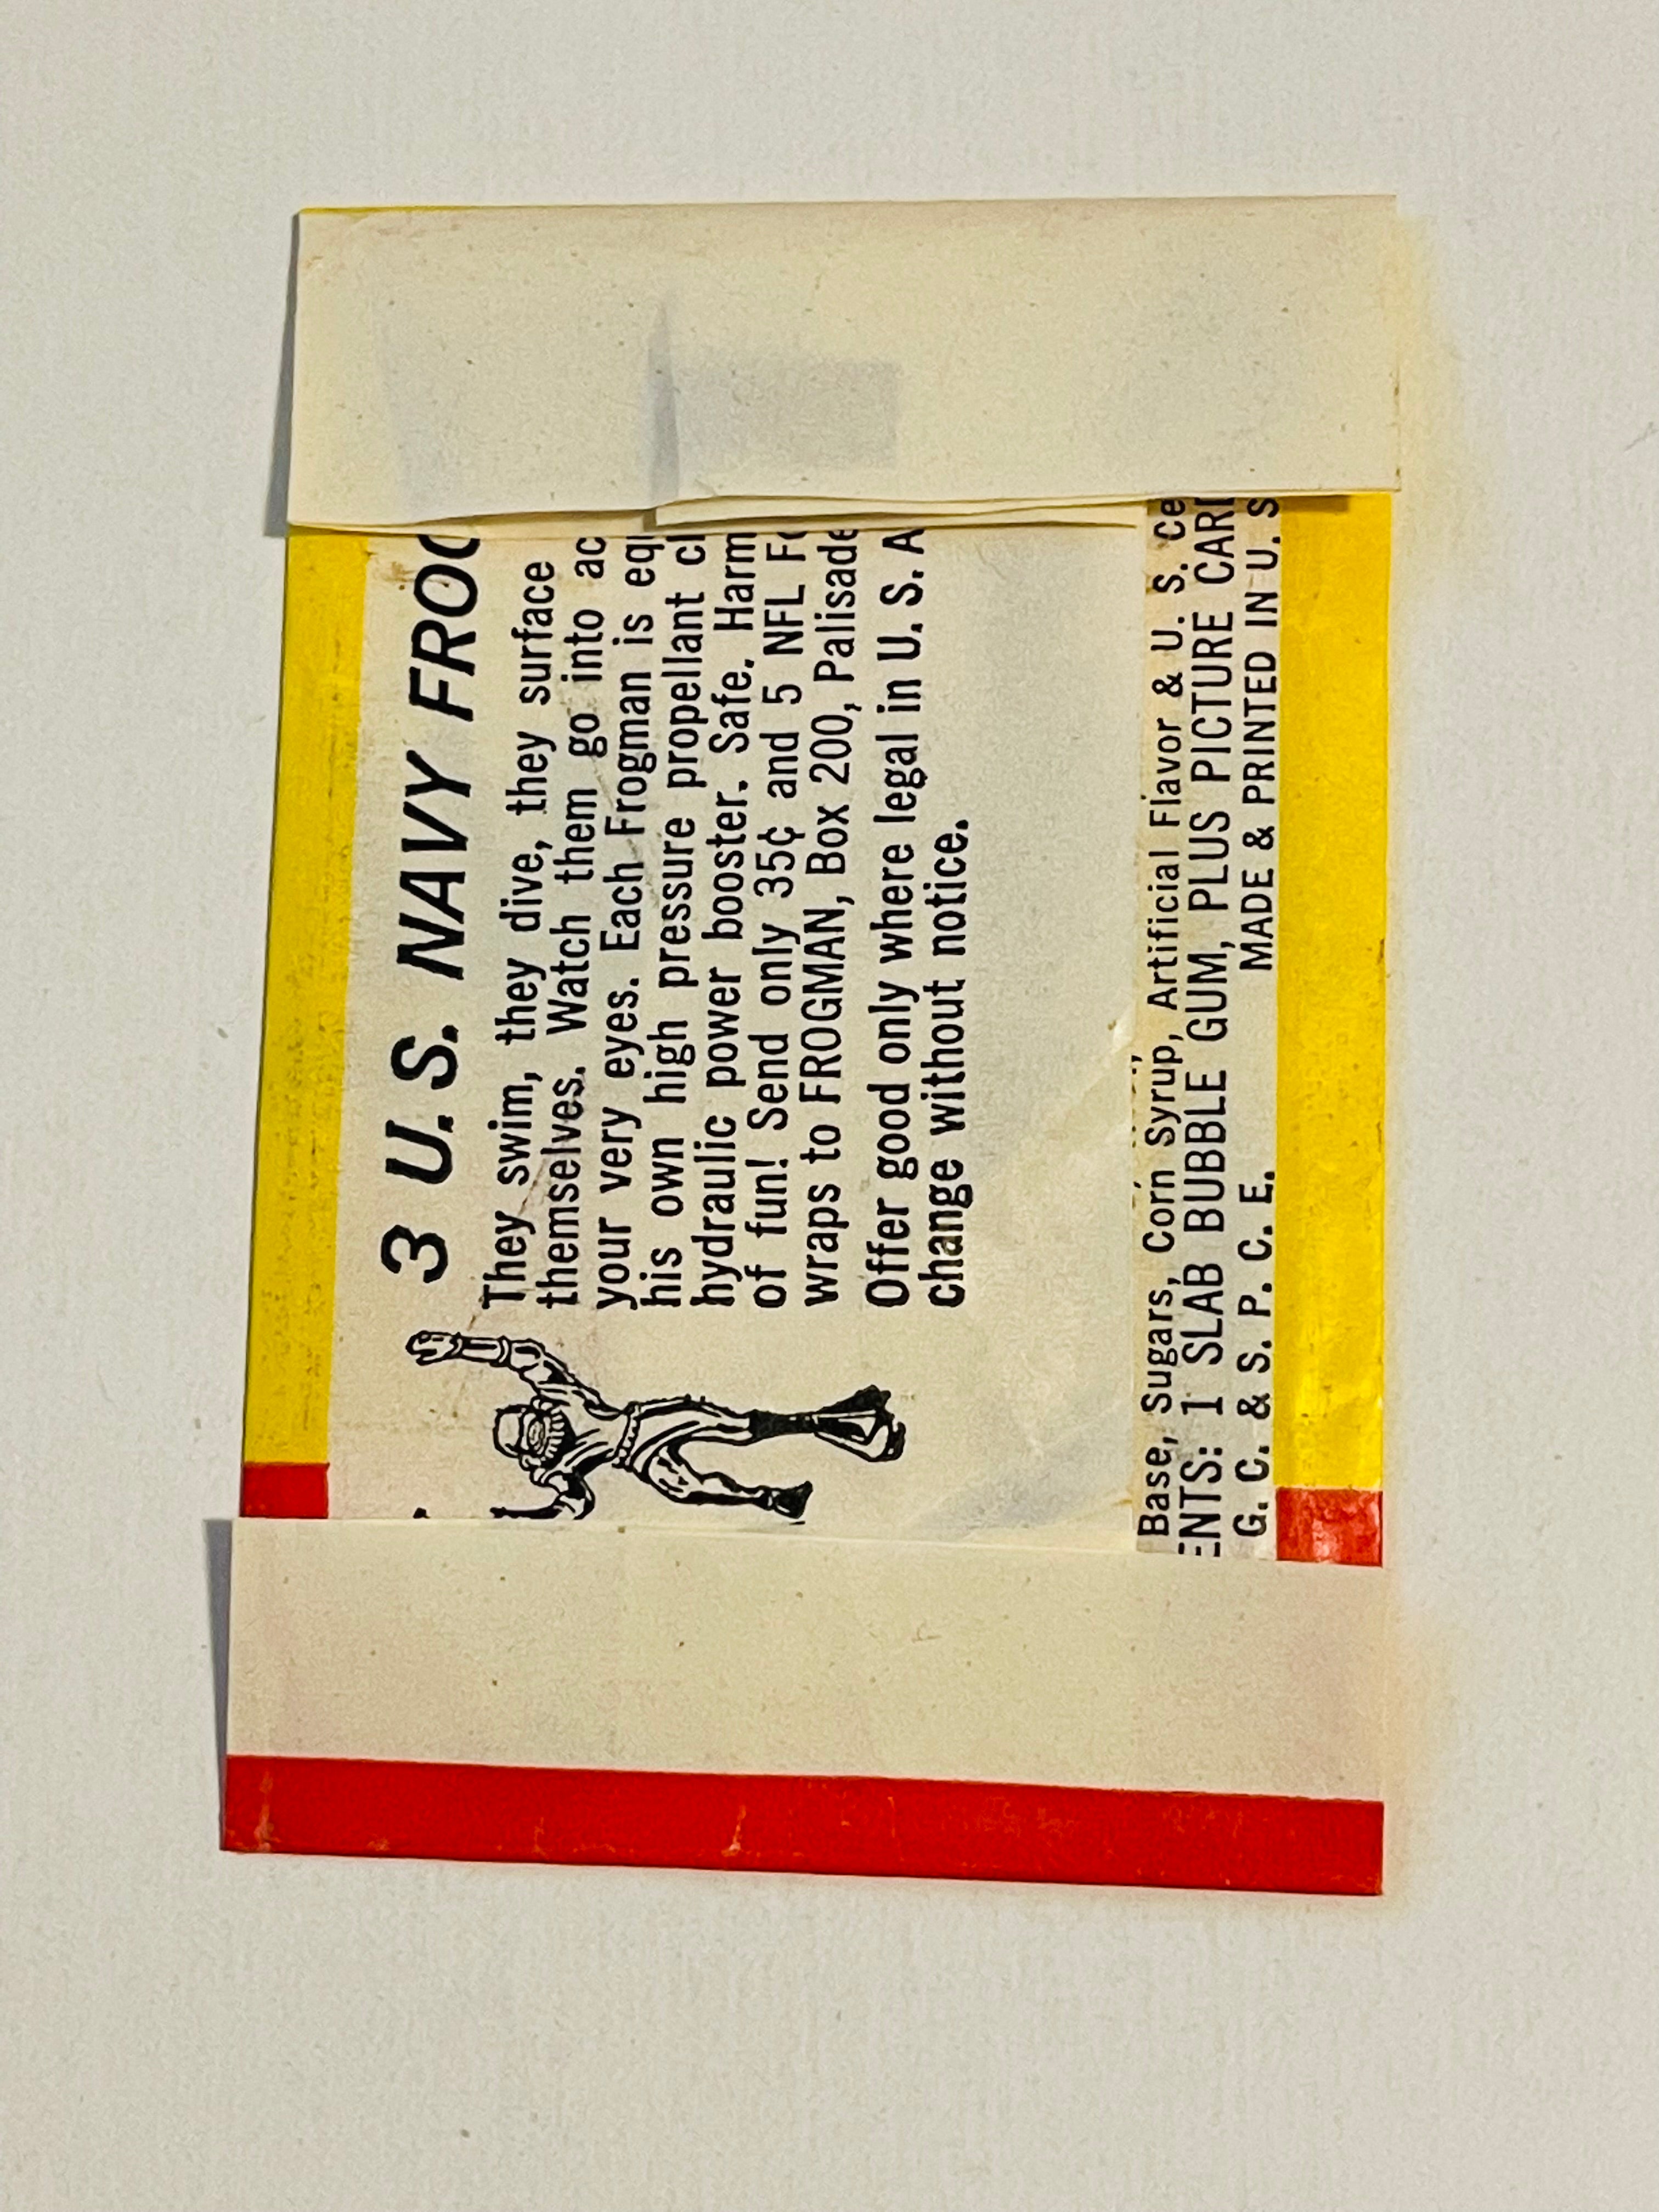 1964 Philly Gum rare vintage football wrapper